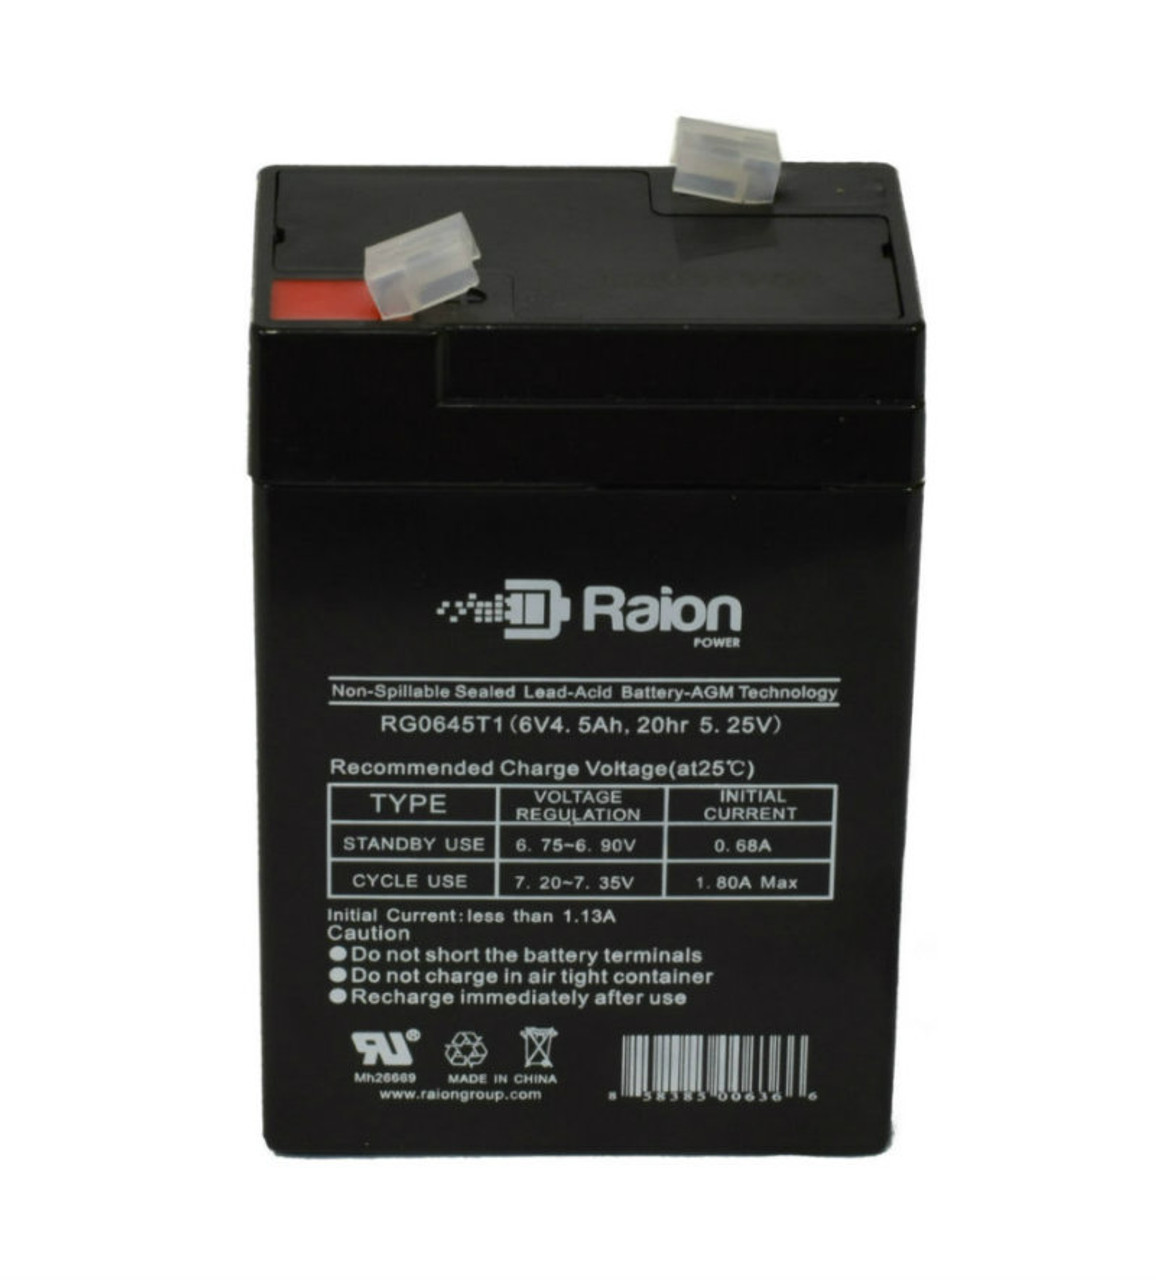 Raion Power RG0645T1 Replacement Battery Cartridge for Sentry Lite SCR-525-21